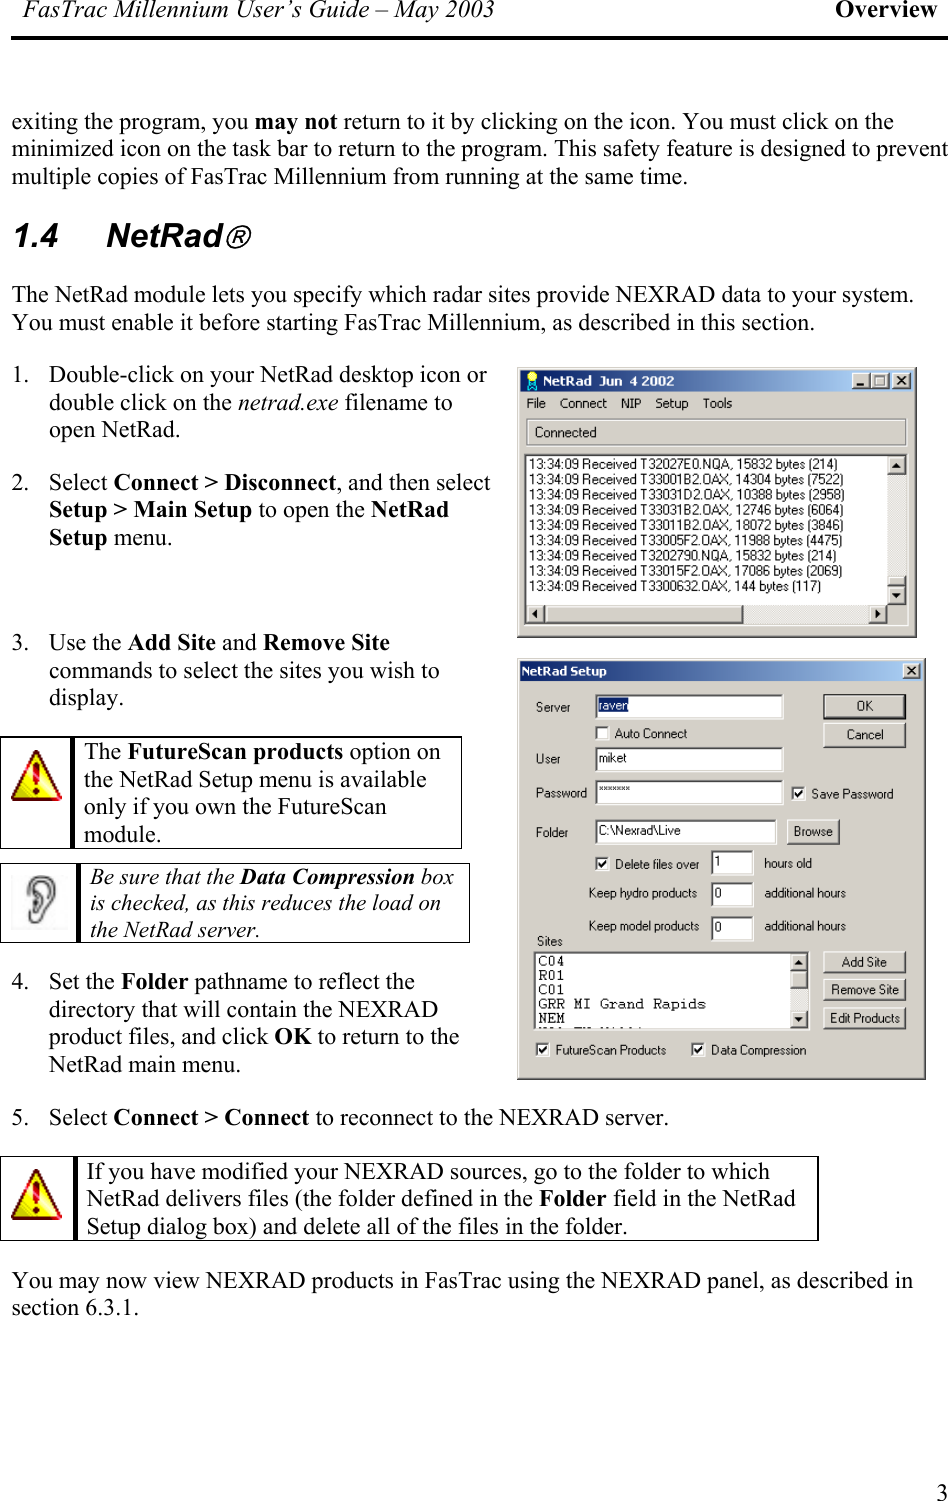 FasTrac Millennium User’s Guide – May 2003 Overview exiting the program, you may not return to it by clicking on the icon. You must click on the minimized icon on the task bar to return to the program. This safety feature is designed to prevent multiple copies of FasTrac Millennium from running at the same time. 1.4 NetRad The NetRad module lets you specify which radar sites provide NEXRAD data to your system. You must enable it before starting FasTrac Millennium, as described in this section. 1.  Double-click on your NetRad desktop icon or double click on the netrad.exe filename to open NetRad. 2. Select Connect &gt; Disconnect, and then select Setup &gt; Main Setup to open the NetRad Setup menu.  3. Use the Add Site and Remove Site commands to select the sites you wish to display.  The FutureScan products option on the NetRad Setup menu is available only if you own the FutureScan module.   Be sure that the Data Compression box is checked, as this reduces the load on the NetRad server. 4. Set the Folder pathname to reflect the directory that will contain the NEXRAD product files, and click OK to return to the NetRad main menu. 5. Select Connect &gt; Connect to reconnect to the NEXRAD server.  If you have modified your NEXRAD sources, go to the folder to which NetRad delivers files (the folder defined in the Folder field in the NetRad Setup dialog box) and delete all of the files in the folder. You may now view NEXRAD products in FasTrac using the NEXRAD panel, as described in section 6.3.1. 3 